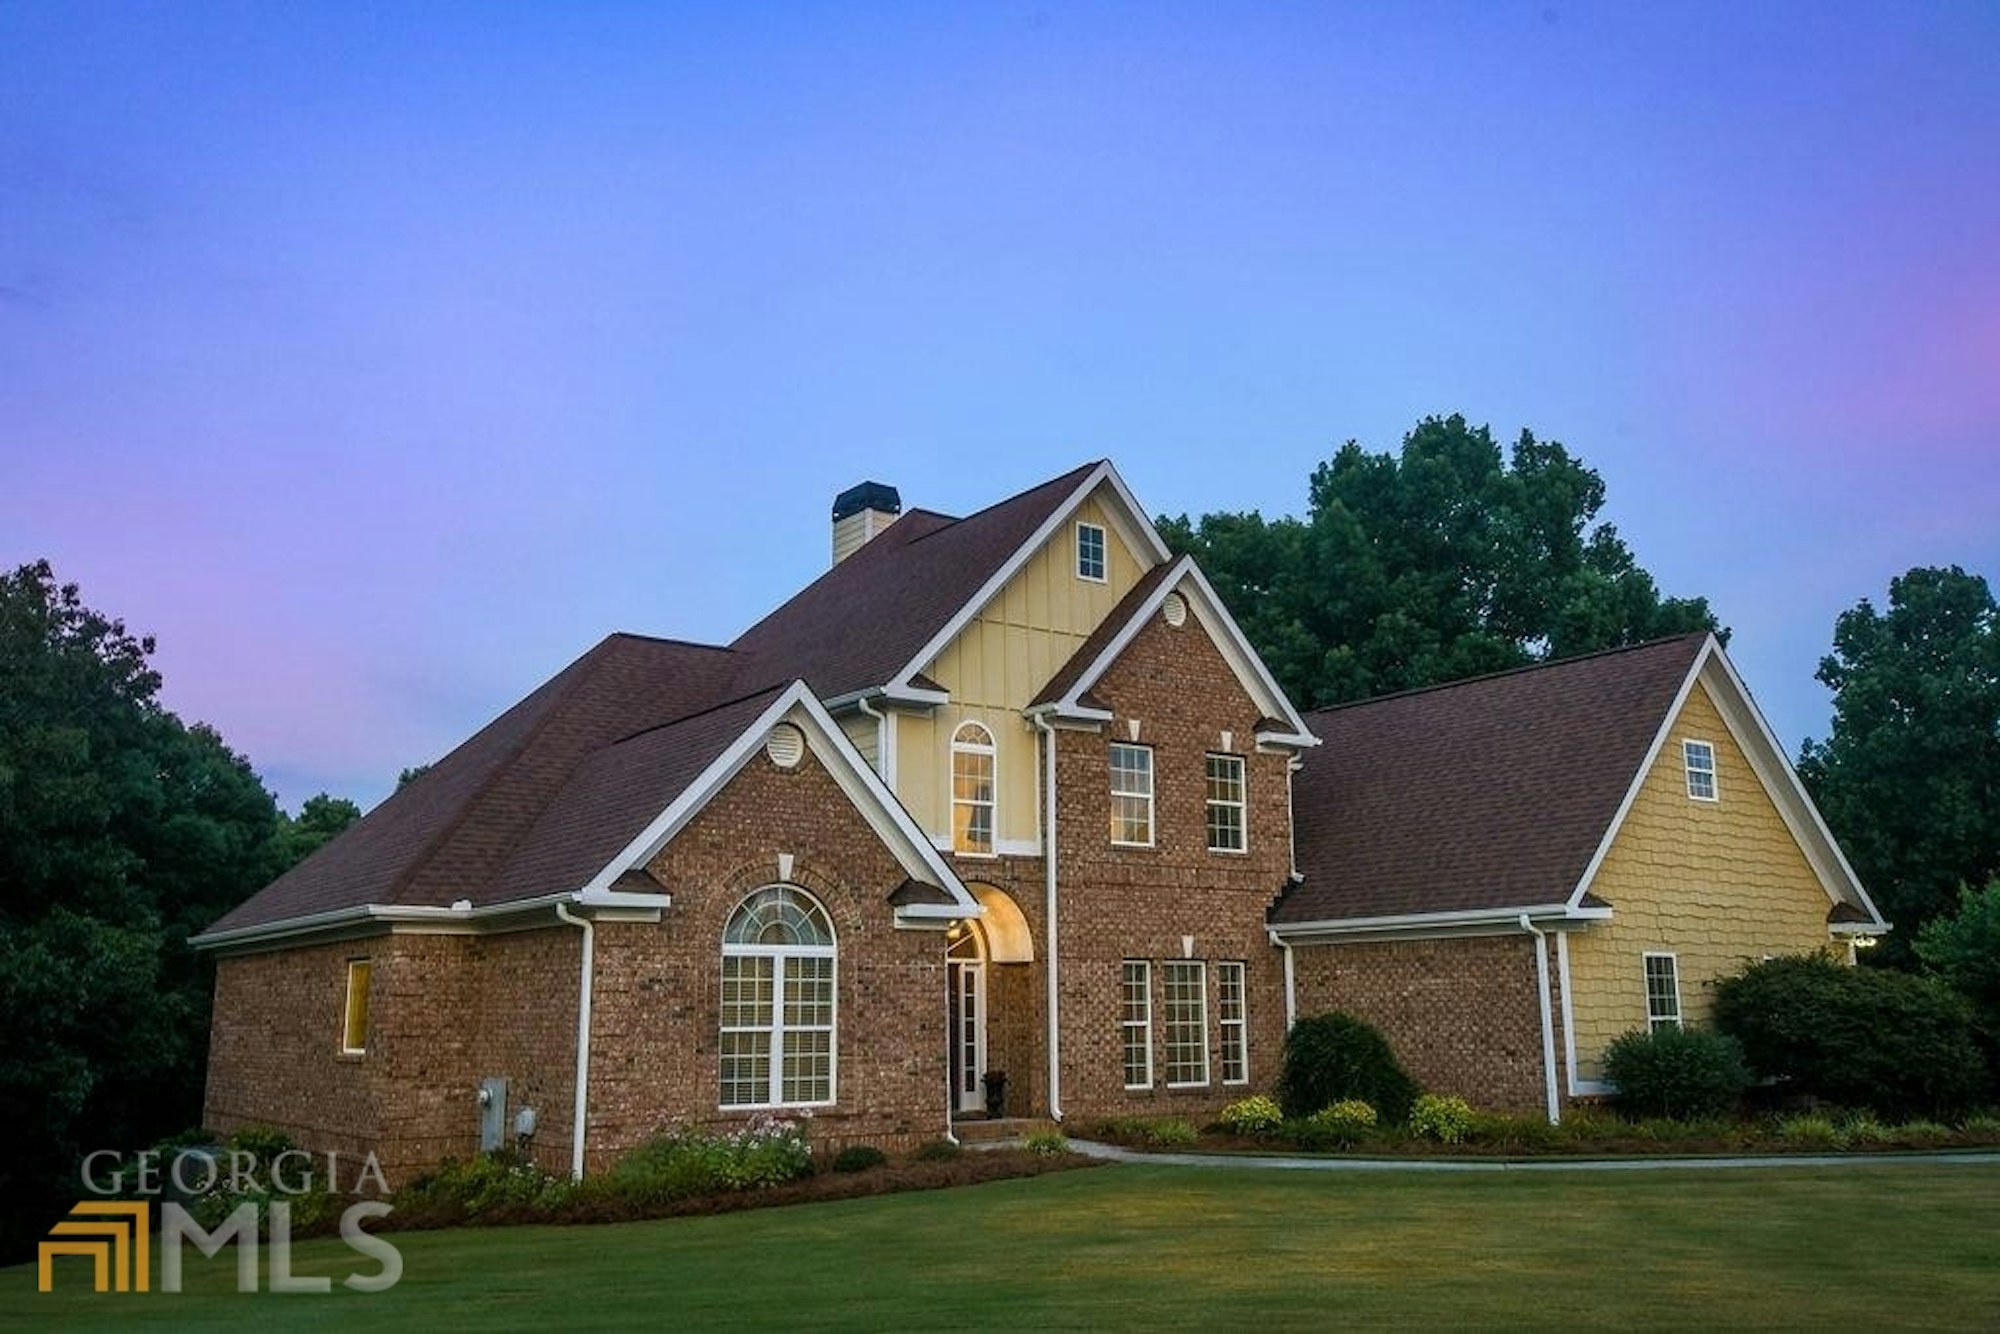 Photo 1 of 105 - 1013 Country Ln, Loganville, GA 30052